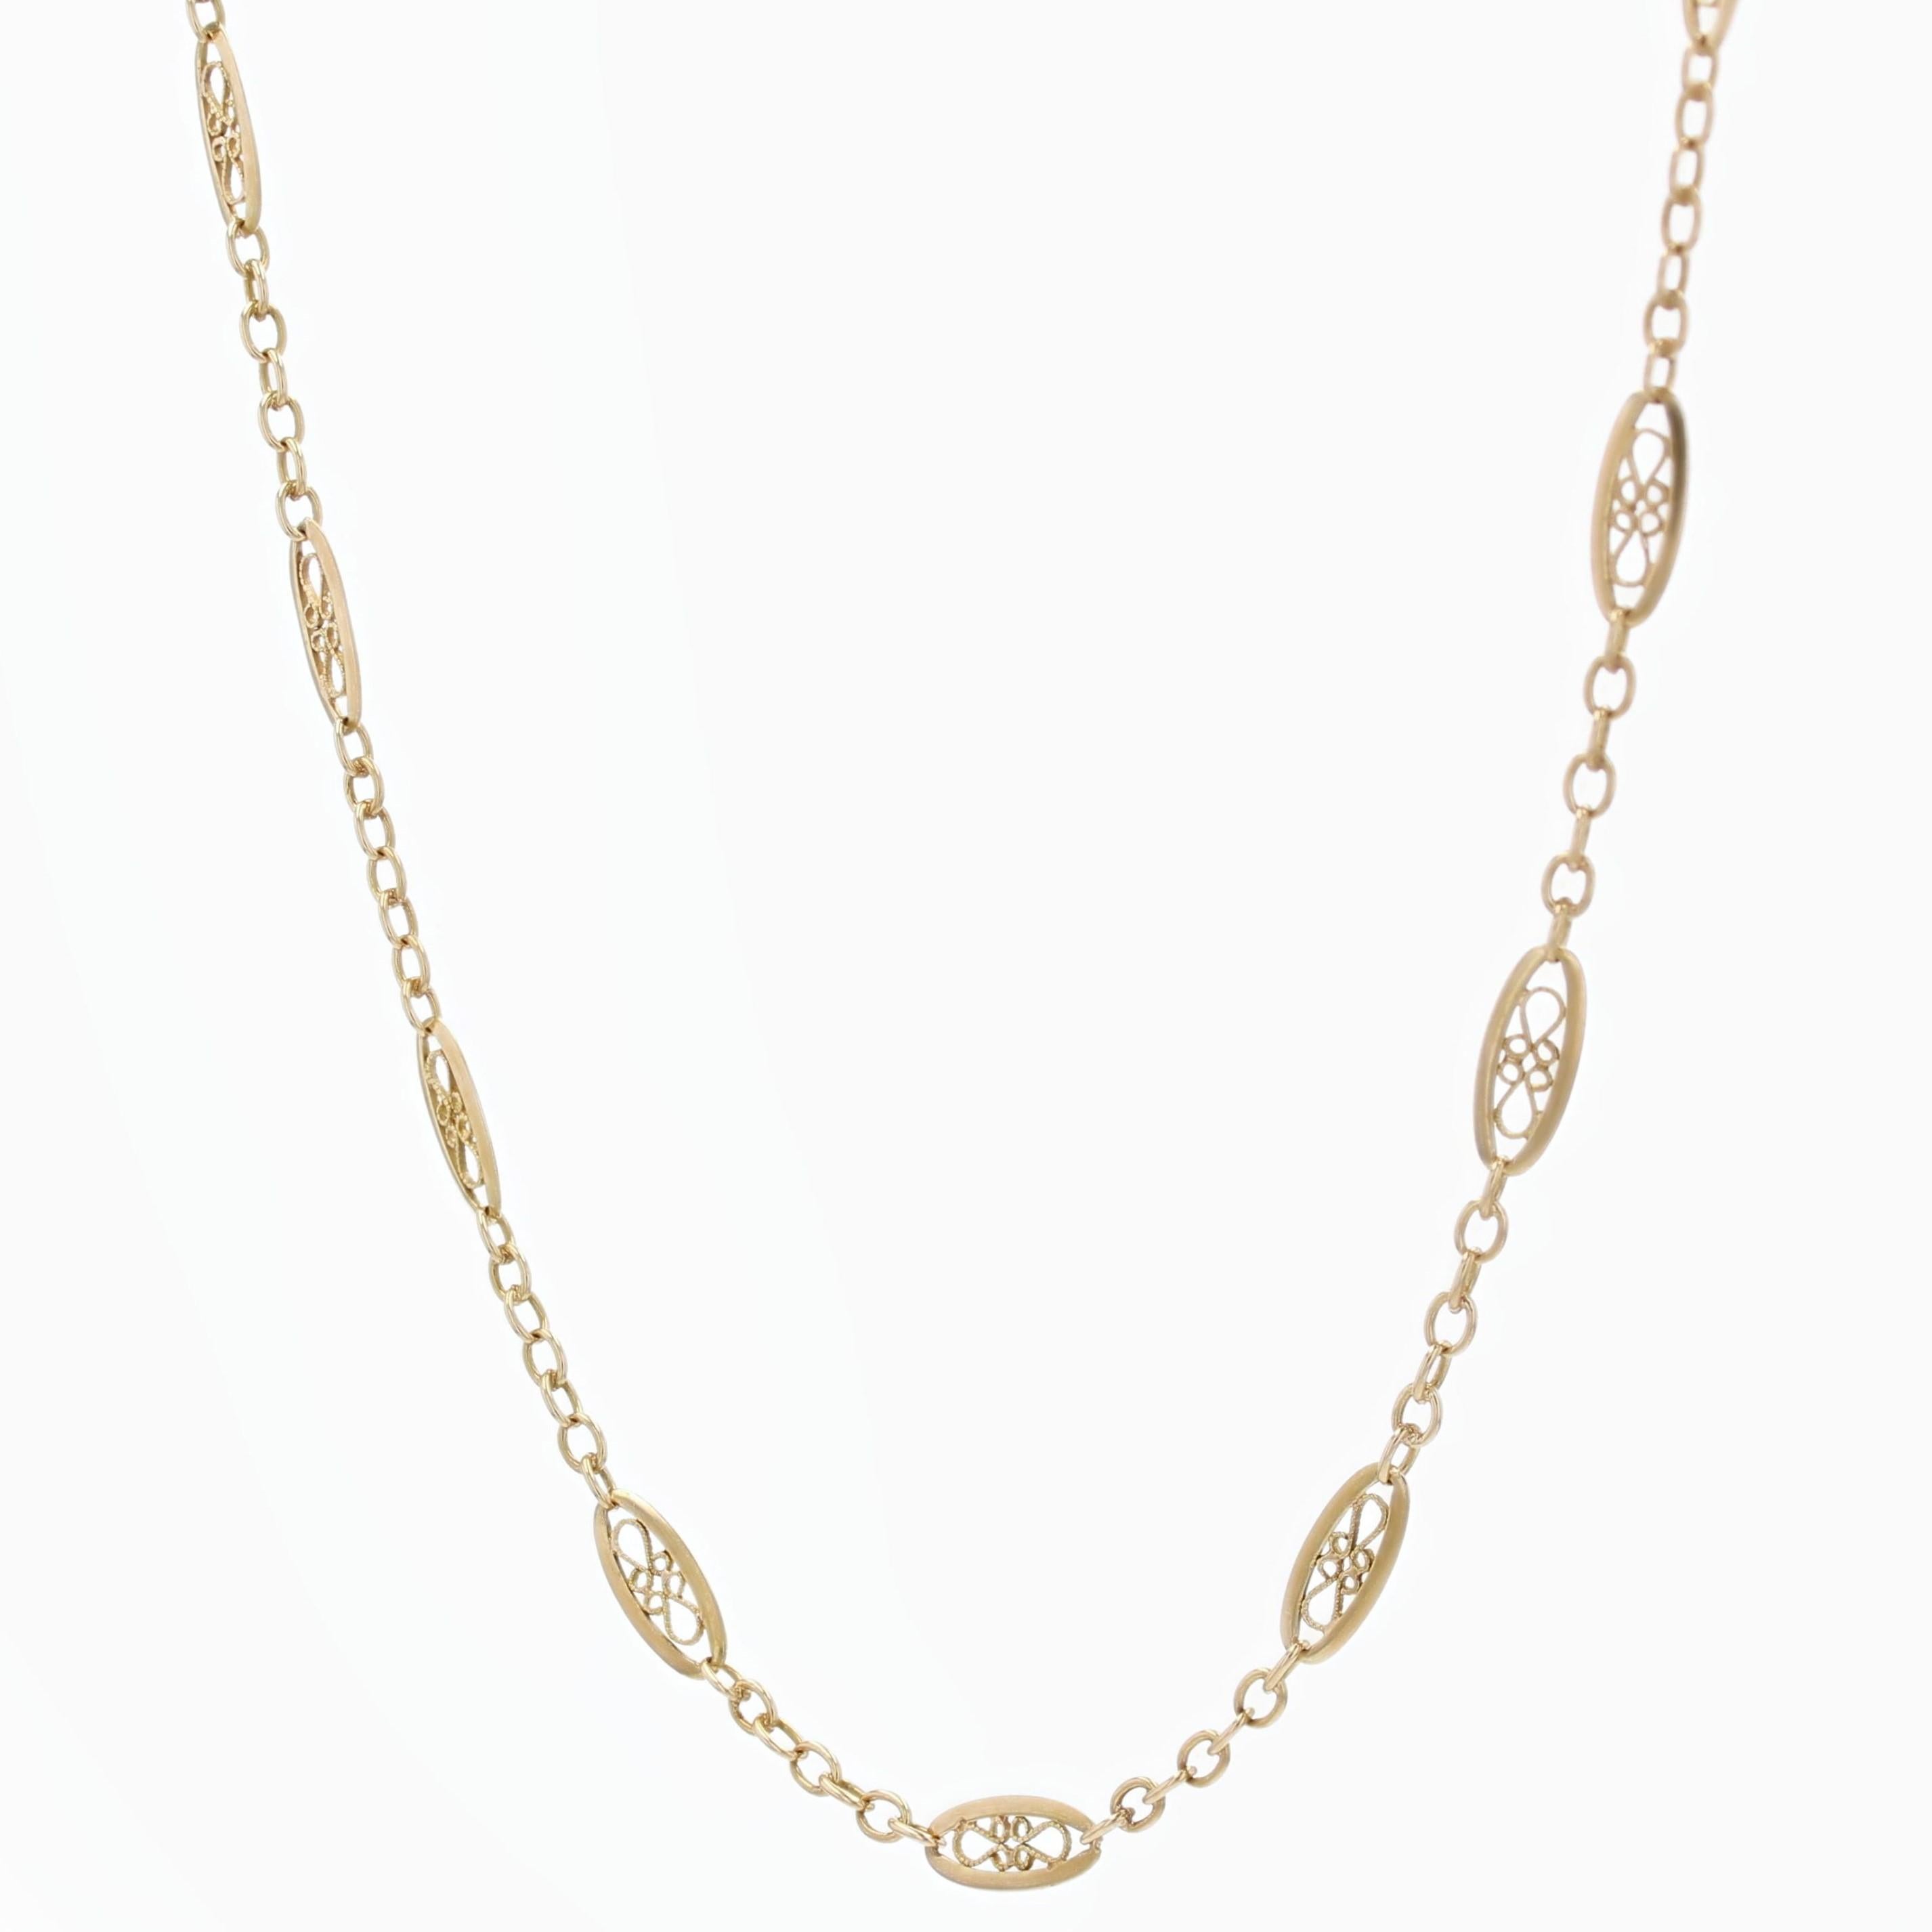 Belle Époque French, 20th Century 18 Karat Yellow Gold Filigree Links Chain For Sale